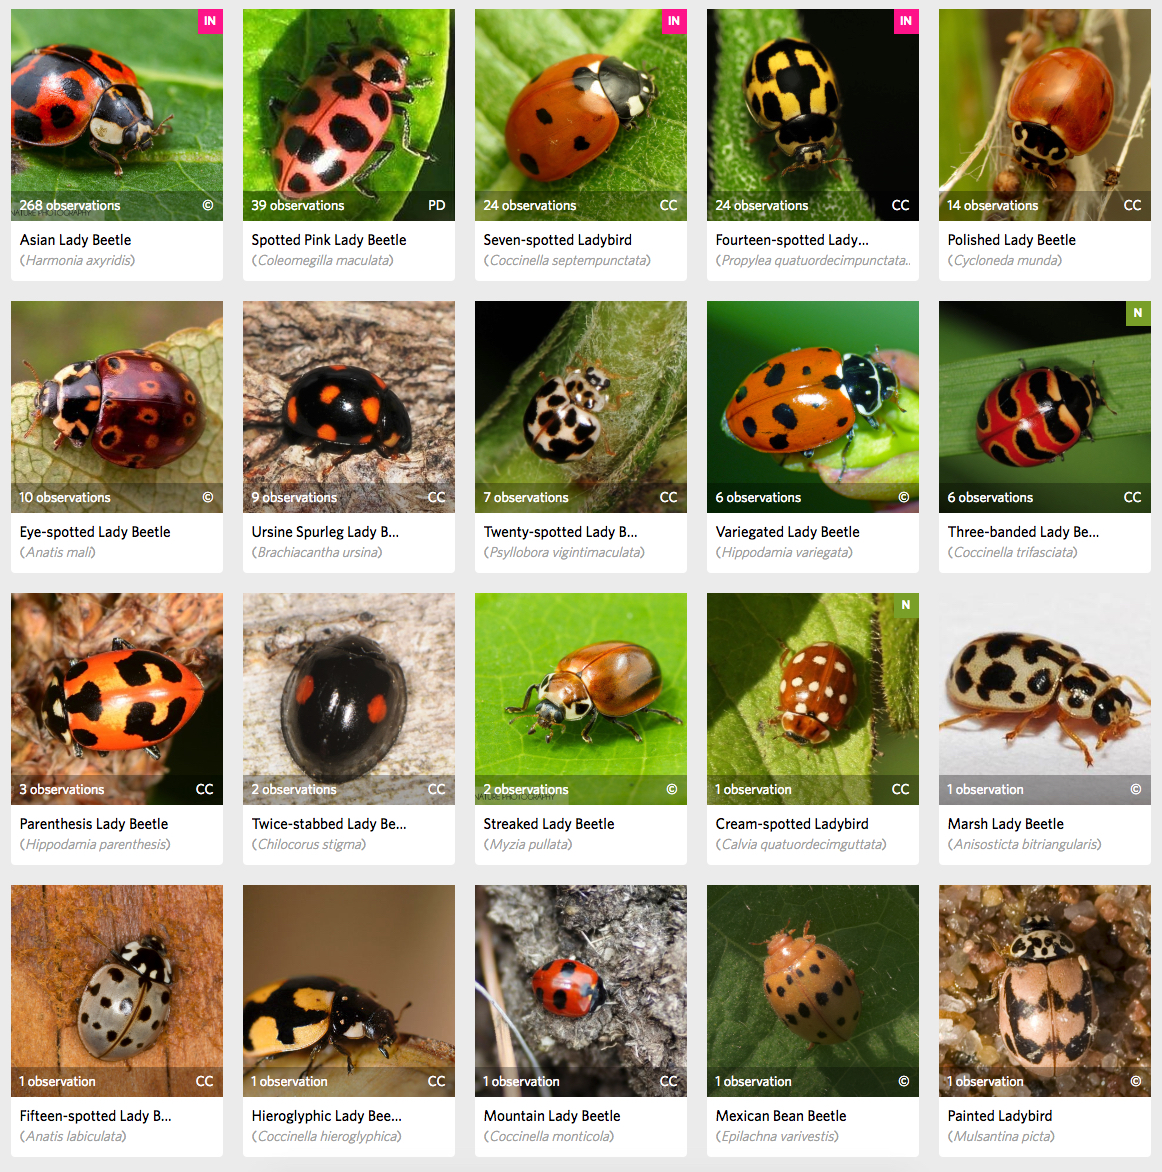 Why are there so many ladybugs and lady beetles?